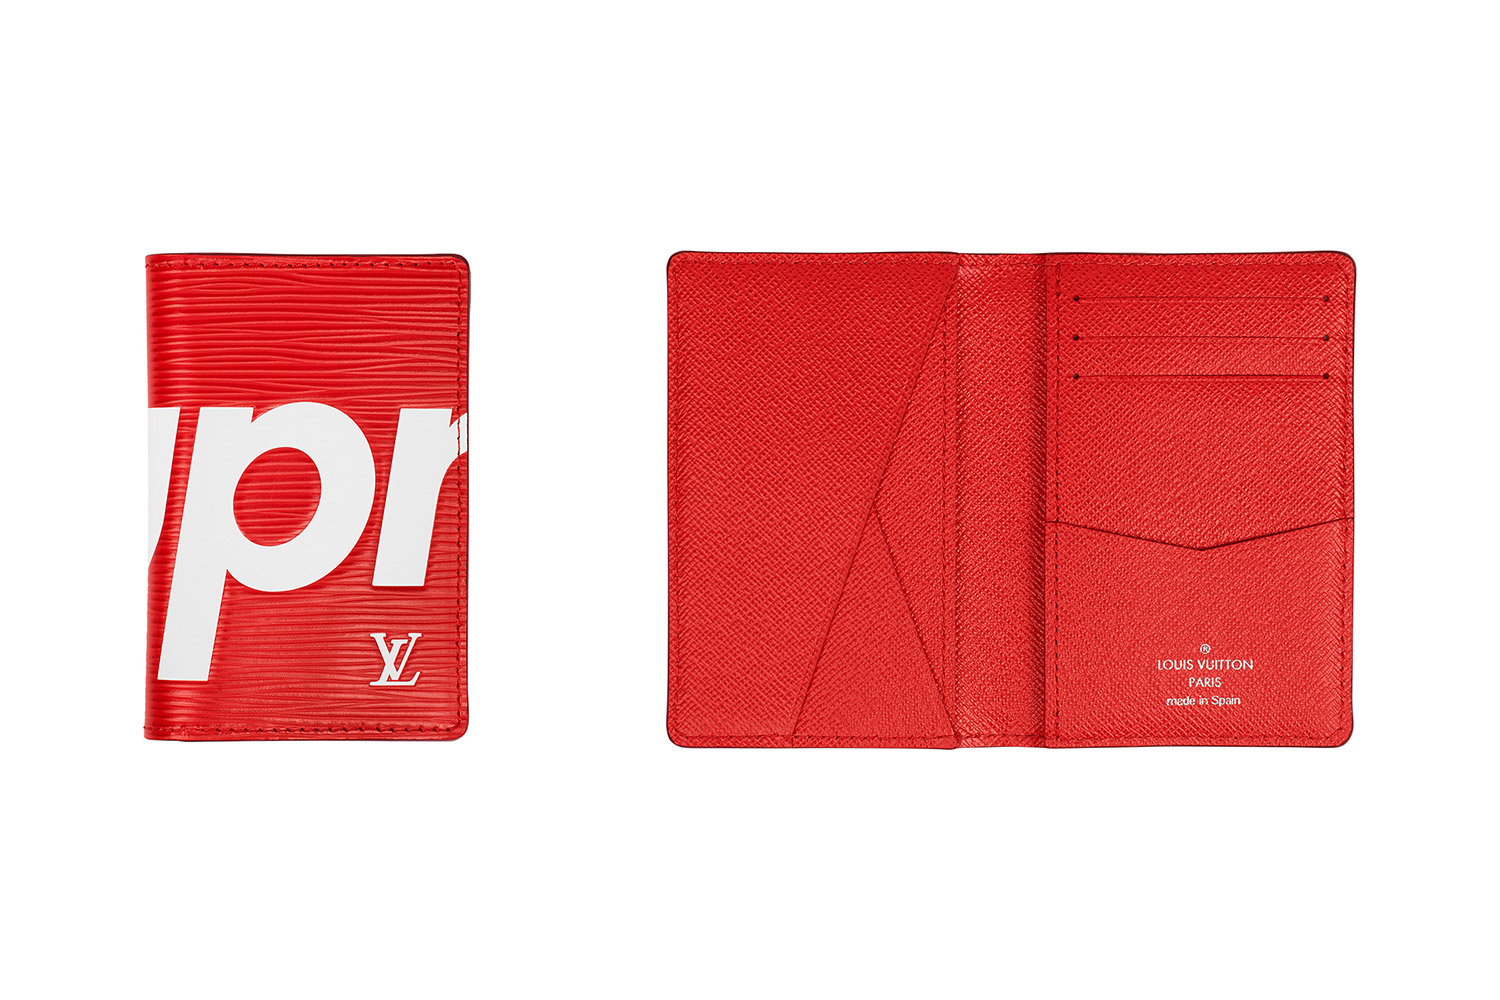 Here's all prices of Supreme x Louis Vuitton